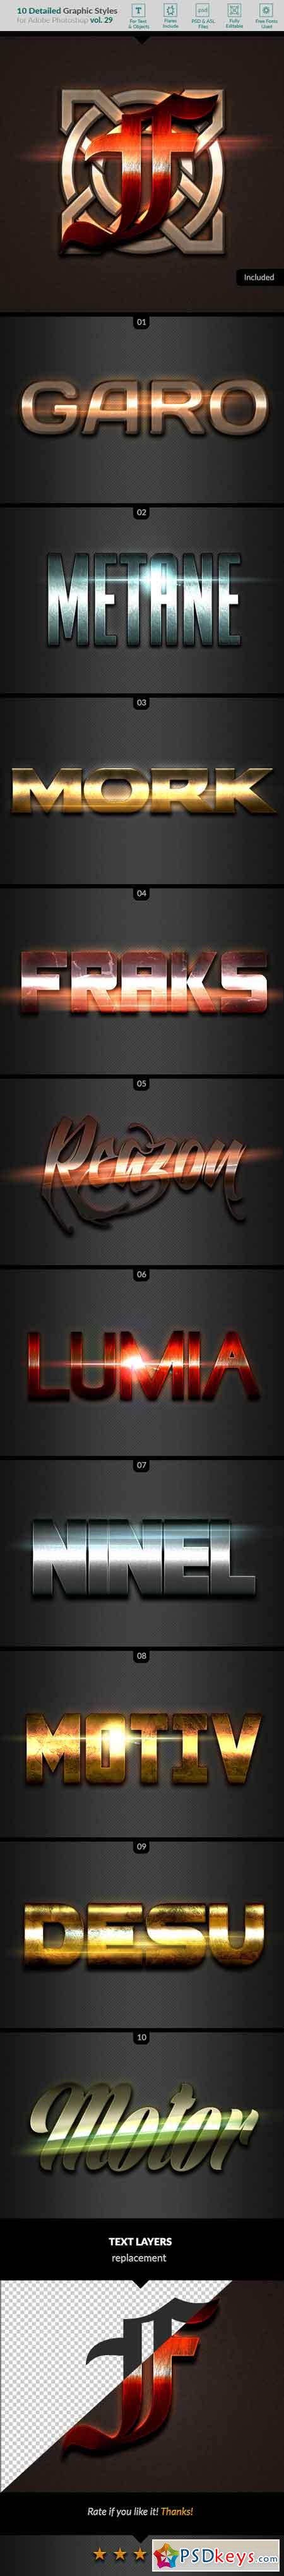 10 Text Effects Vol. 29 22487077